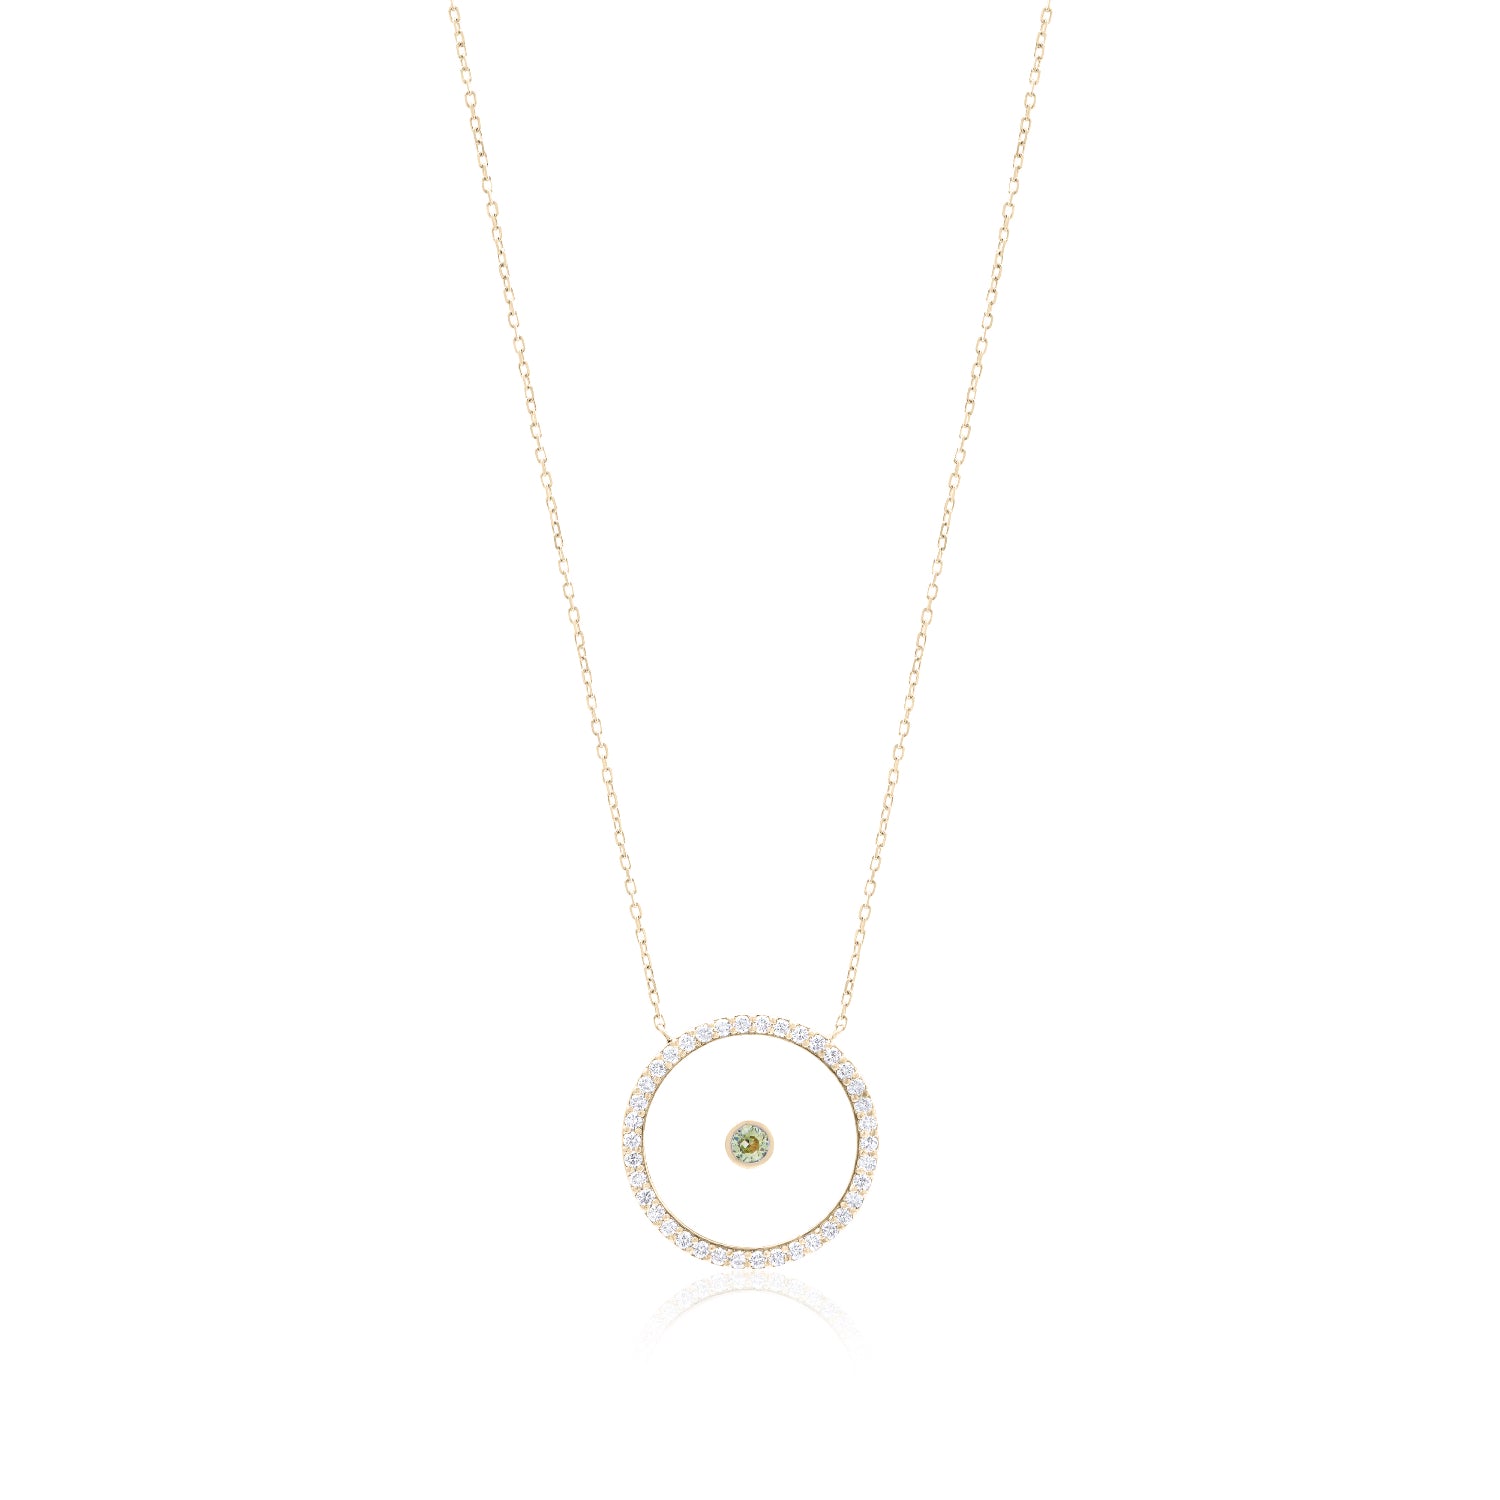 Peridot August Birthstone Necklace in Yellow Gold